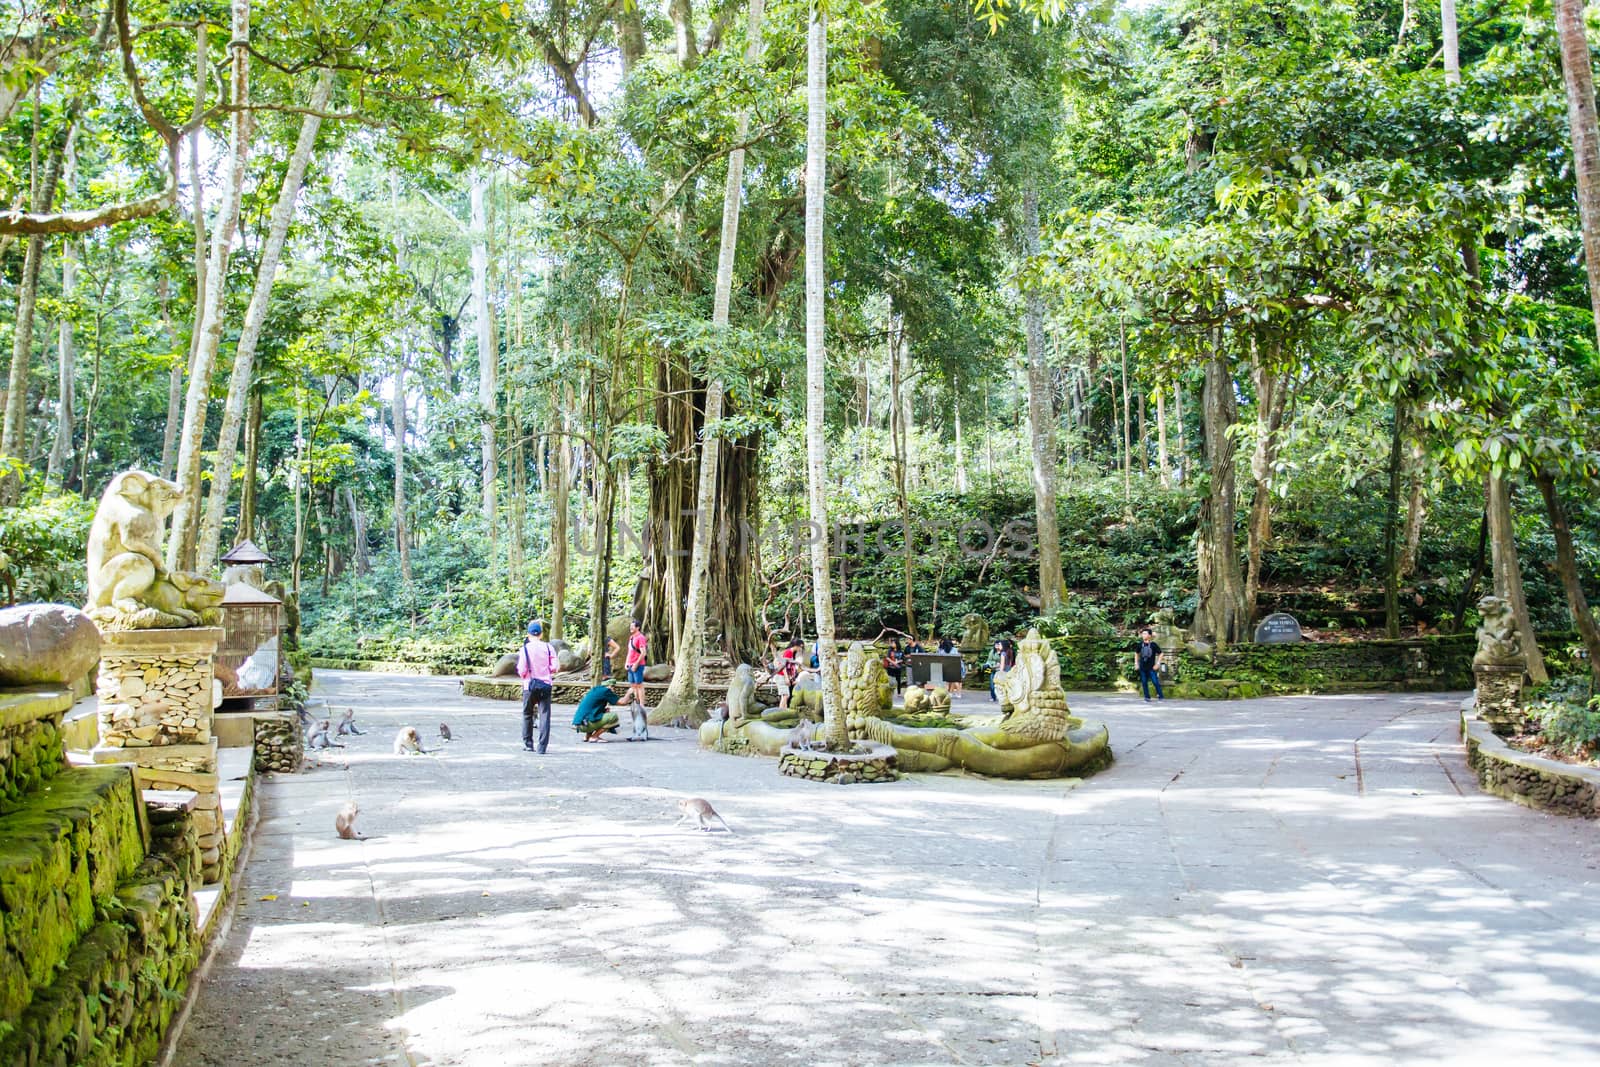 The grounds of Monkey Forest Sanctuary in Ubud, Bali,Indonesia